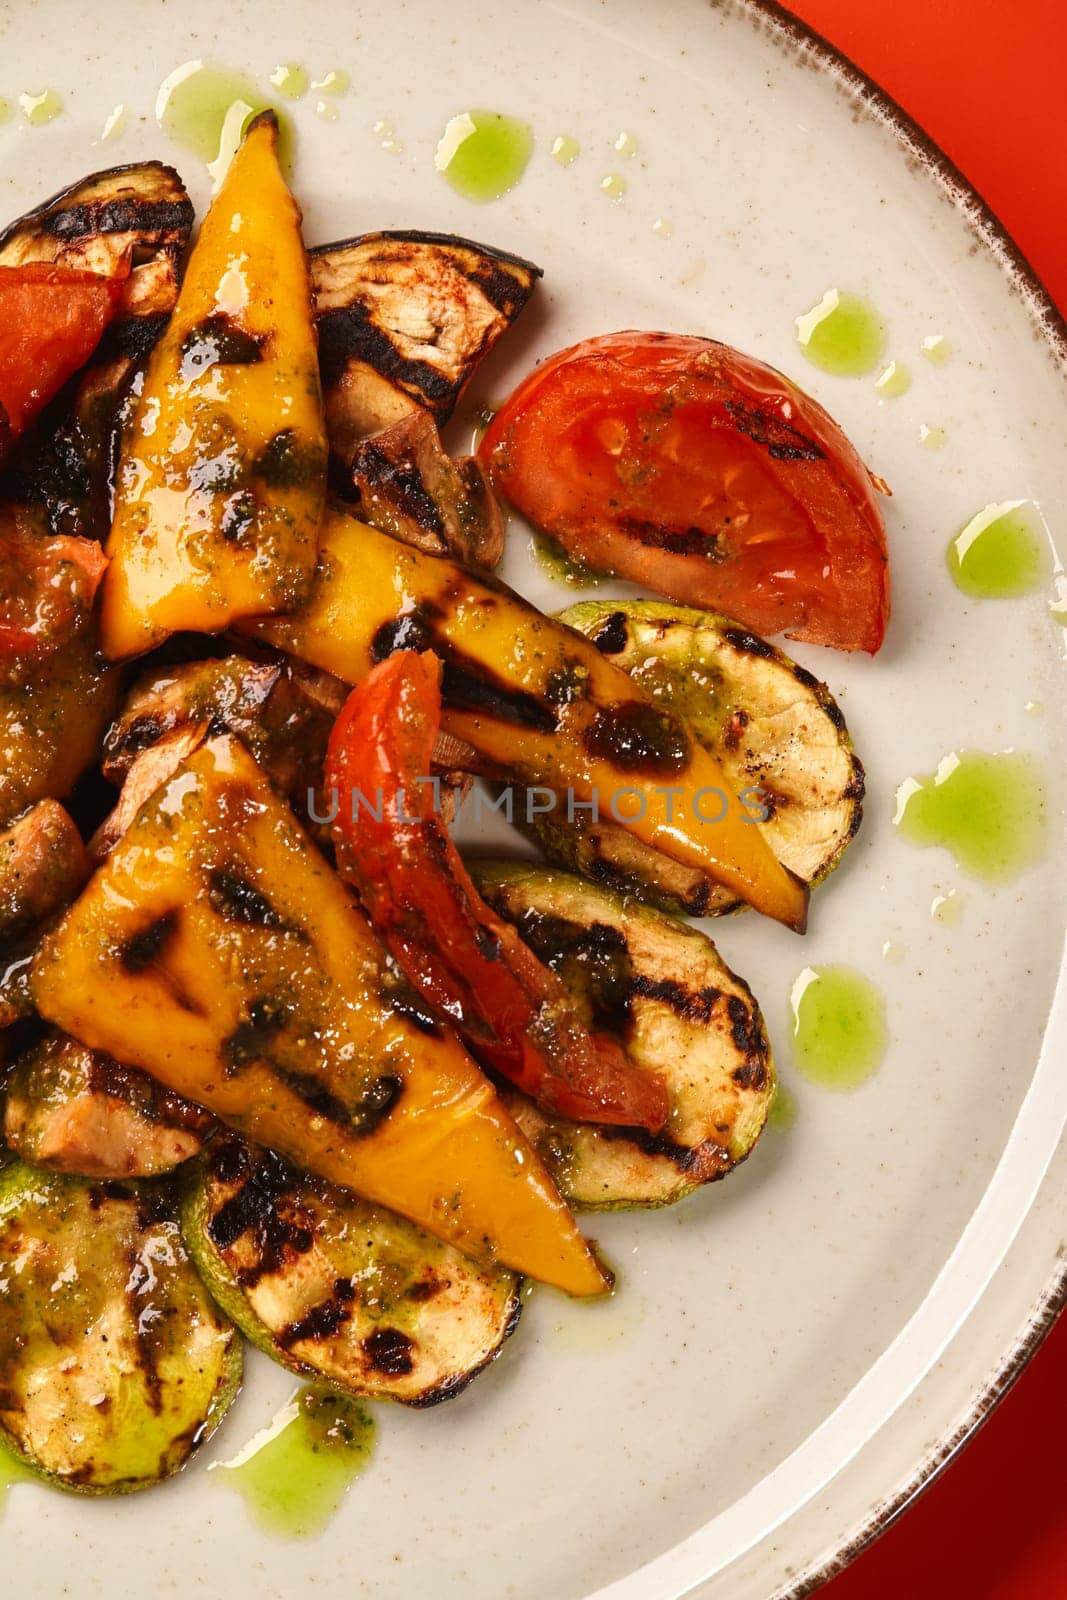 Slices of grilled vegetables and mushrooms with herb oil by nazarovsergey